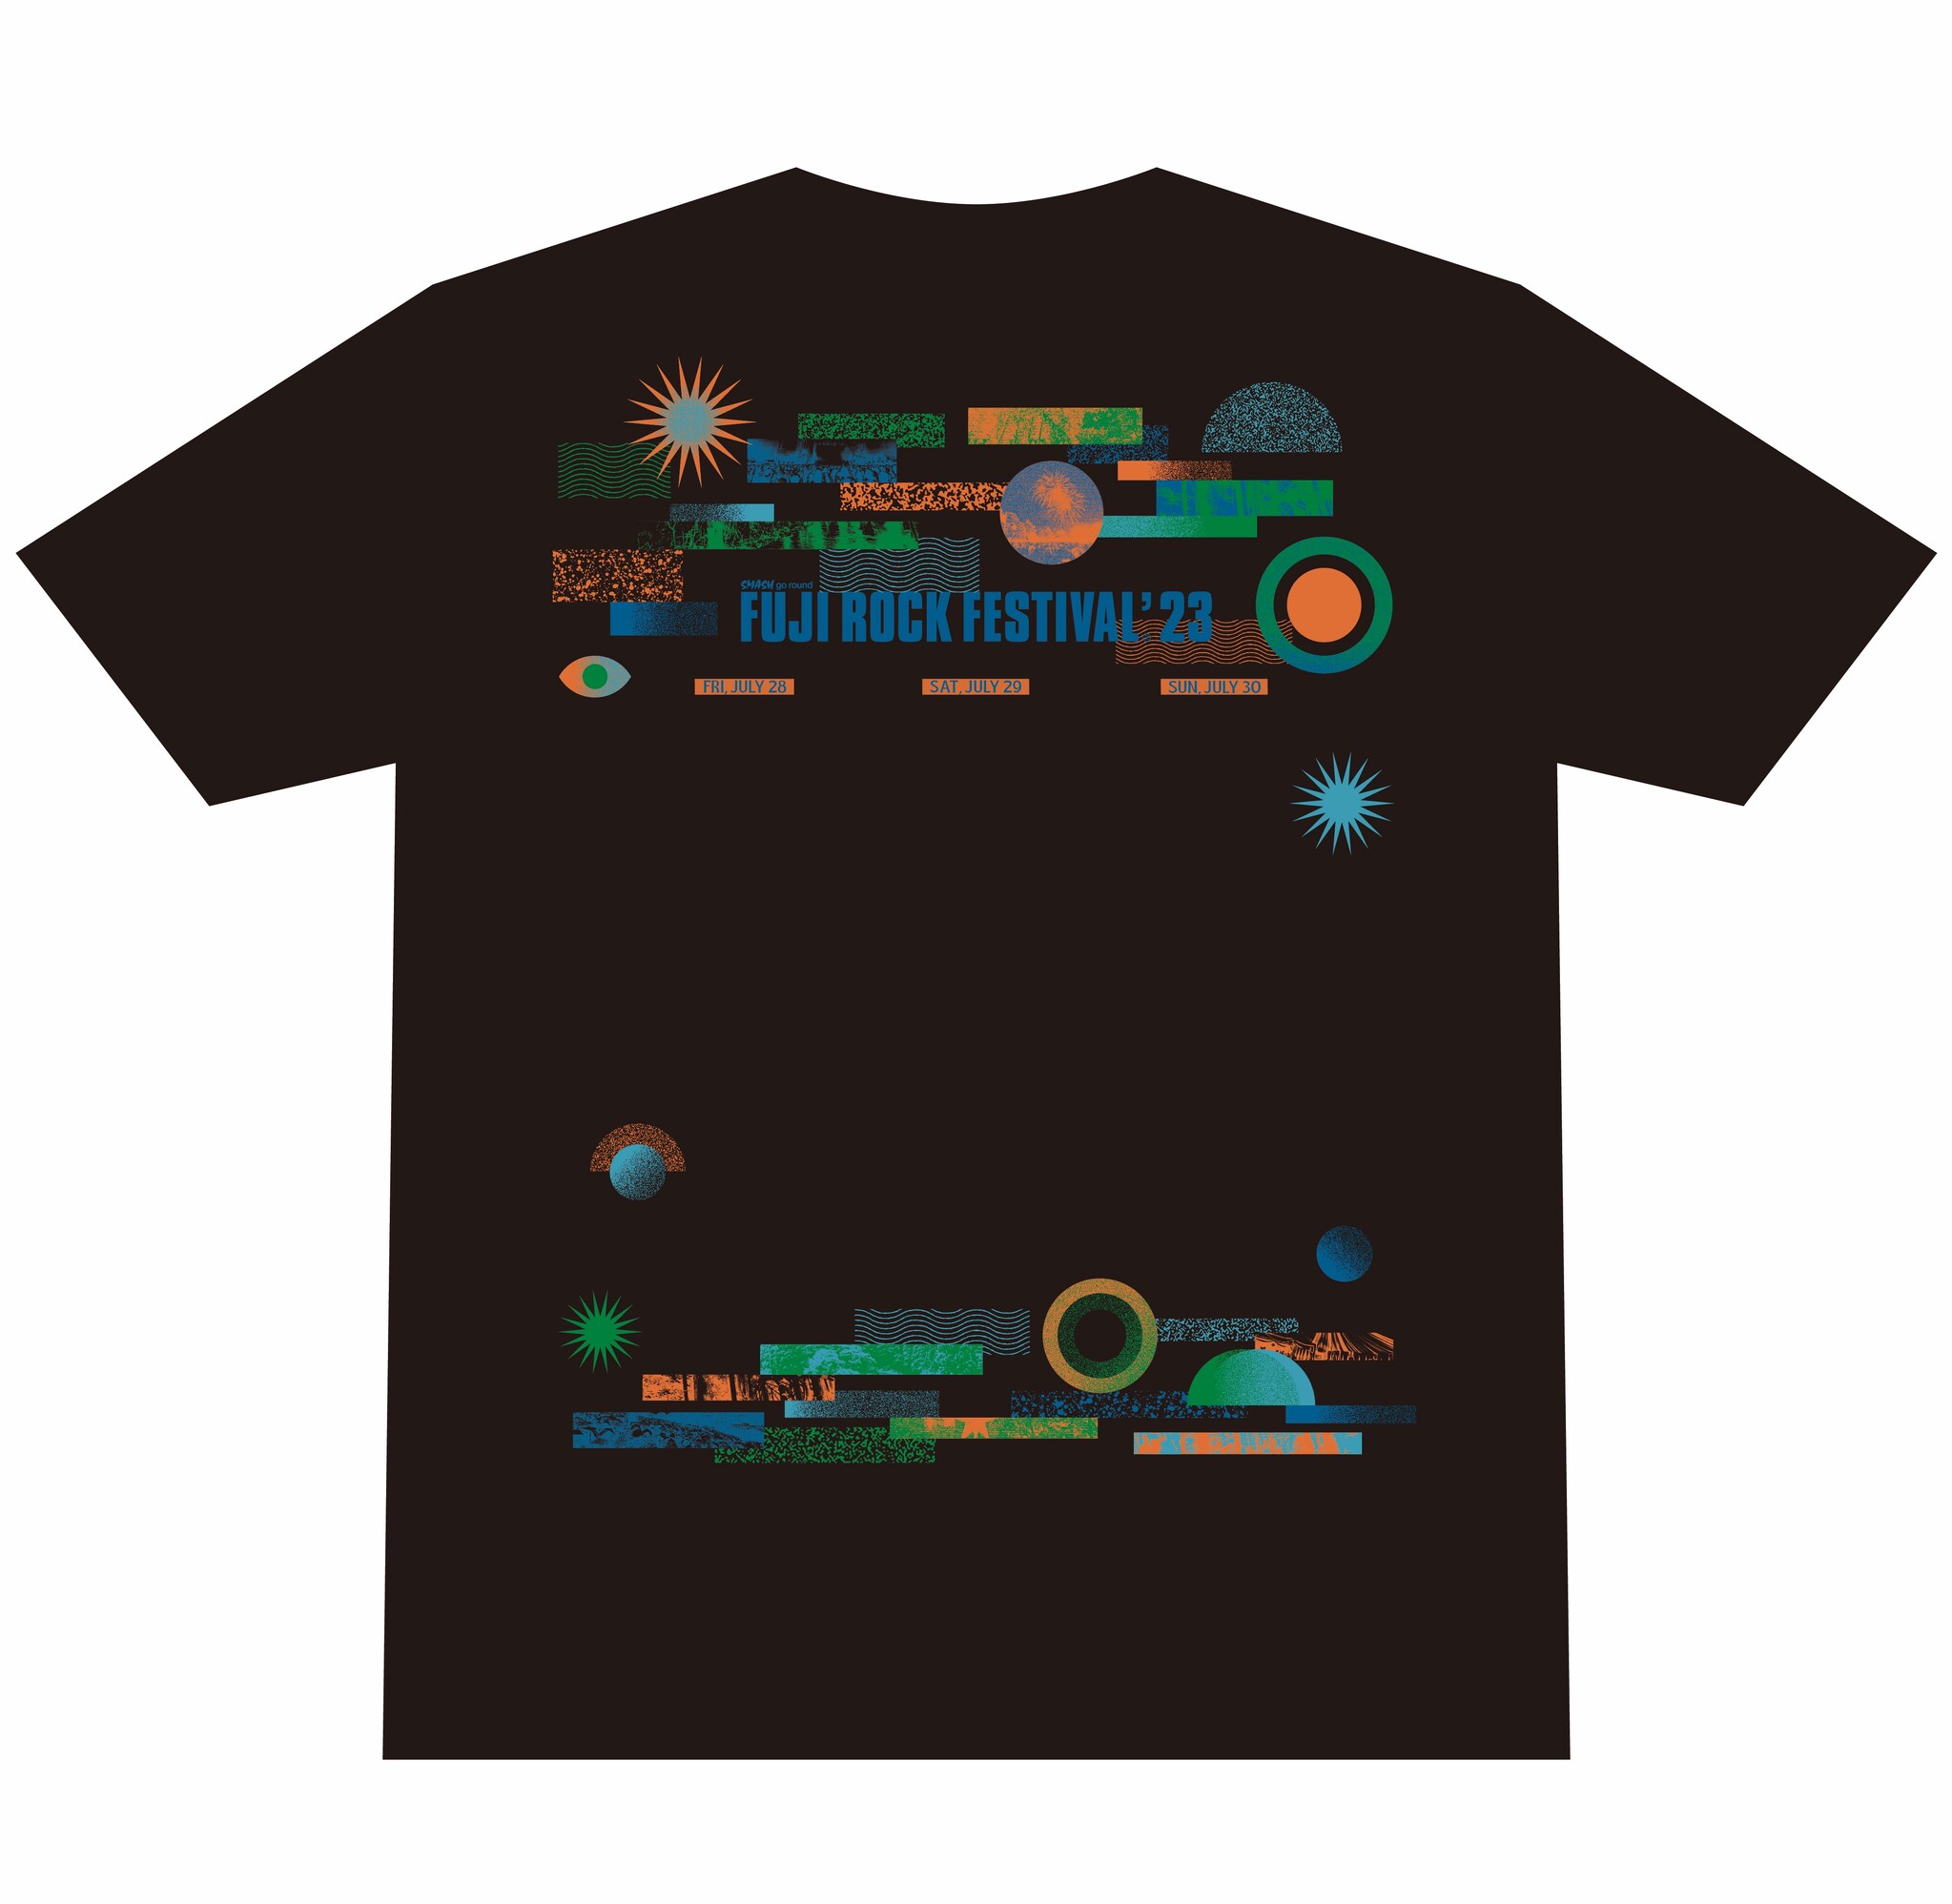 WEEZER Tシャツ FUJIROCK 限定 フジロック 苗場 - Tシャツ/カットソー